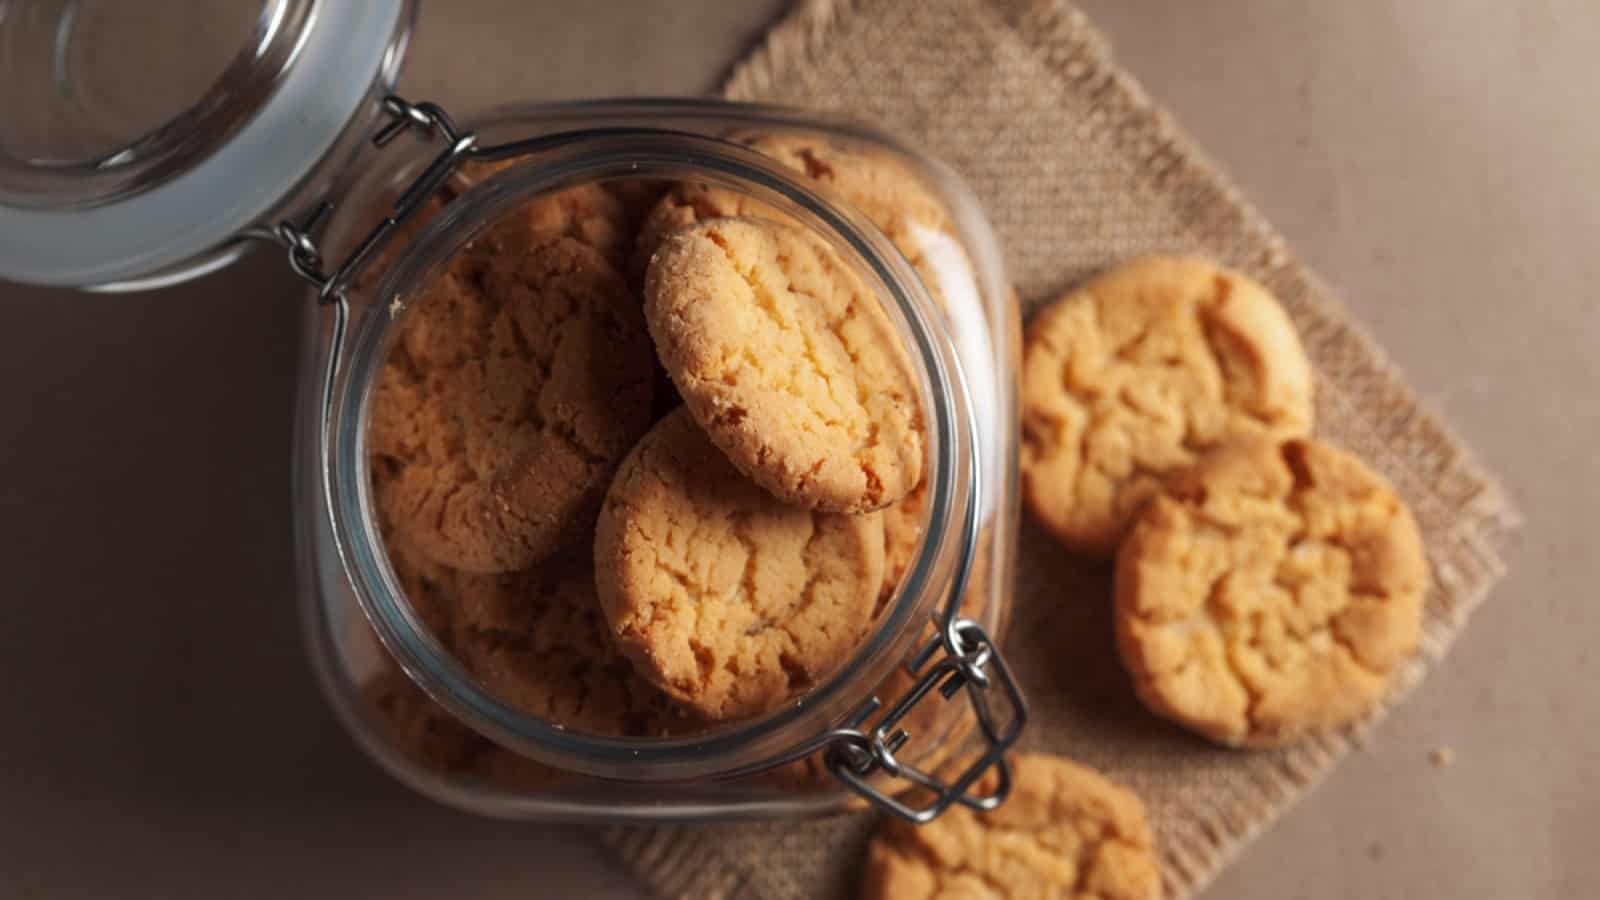 Cookies in a glass jar on a brown table.